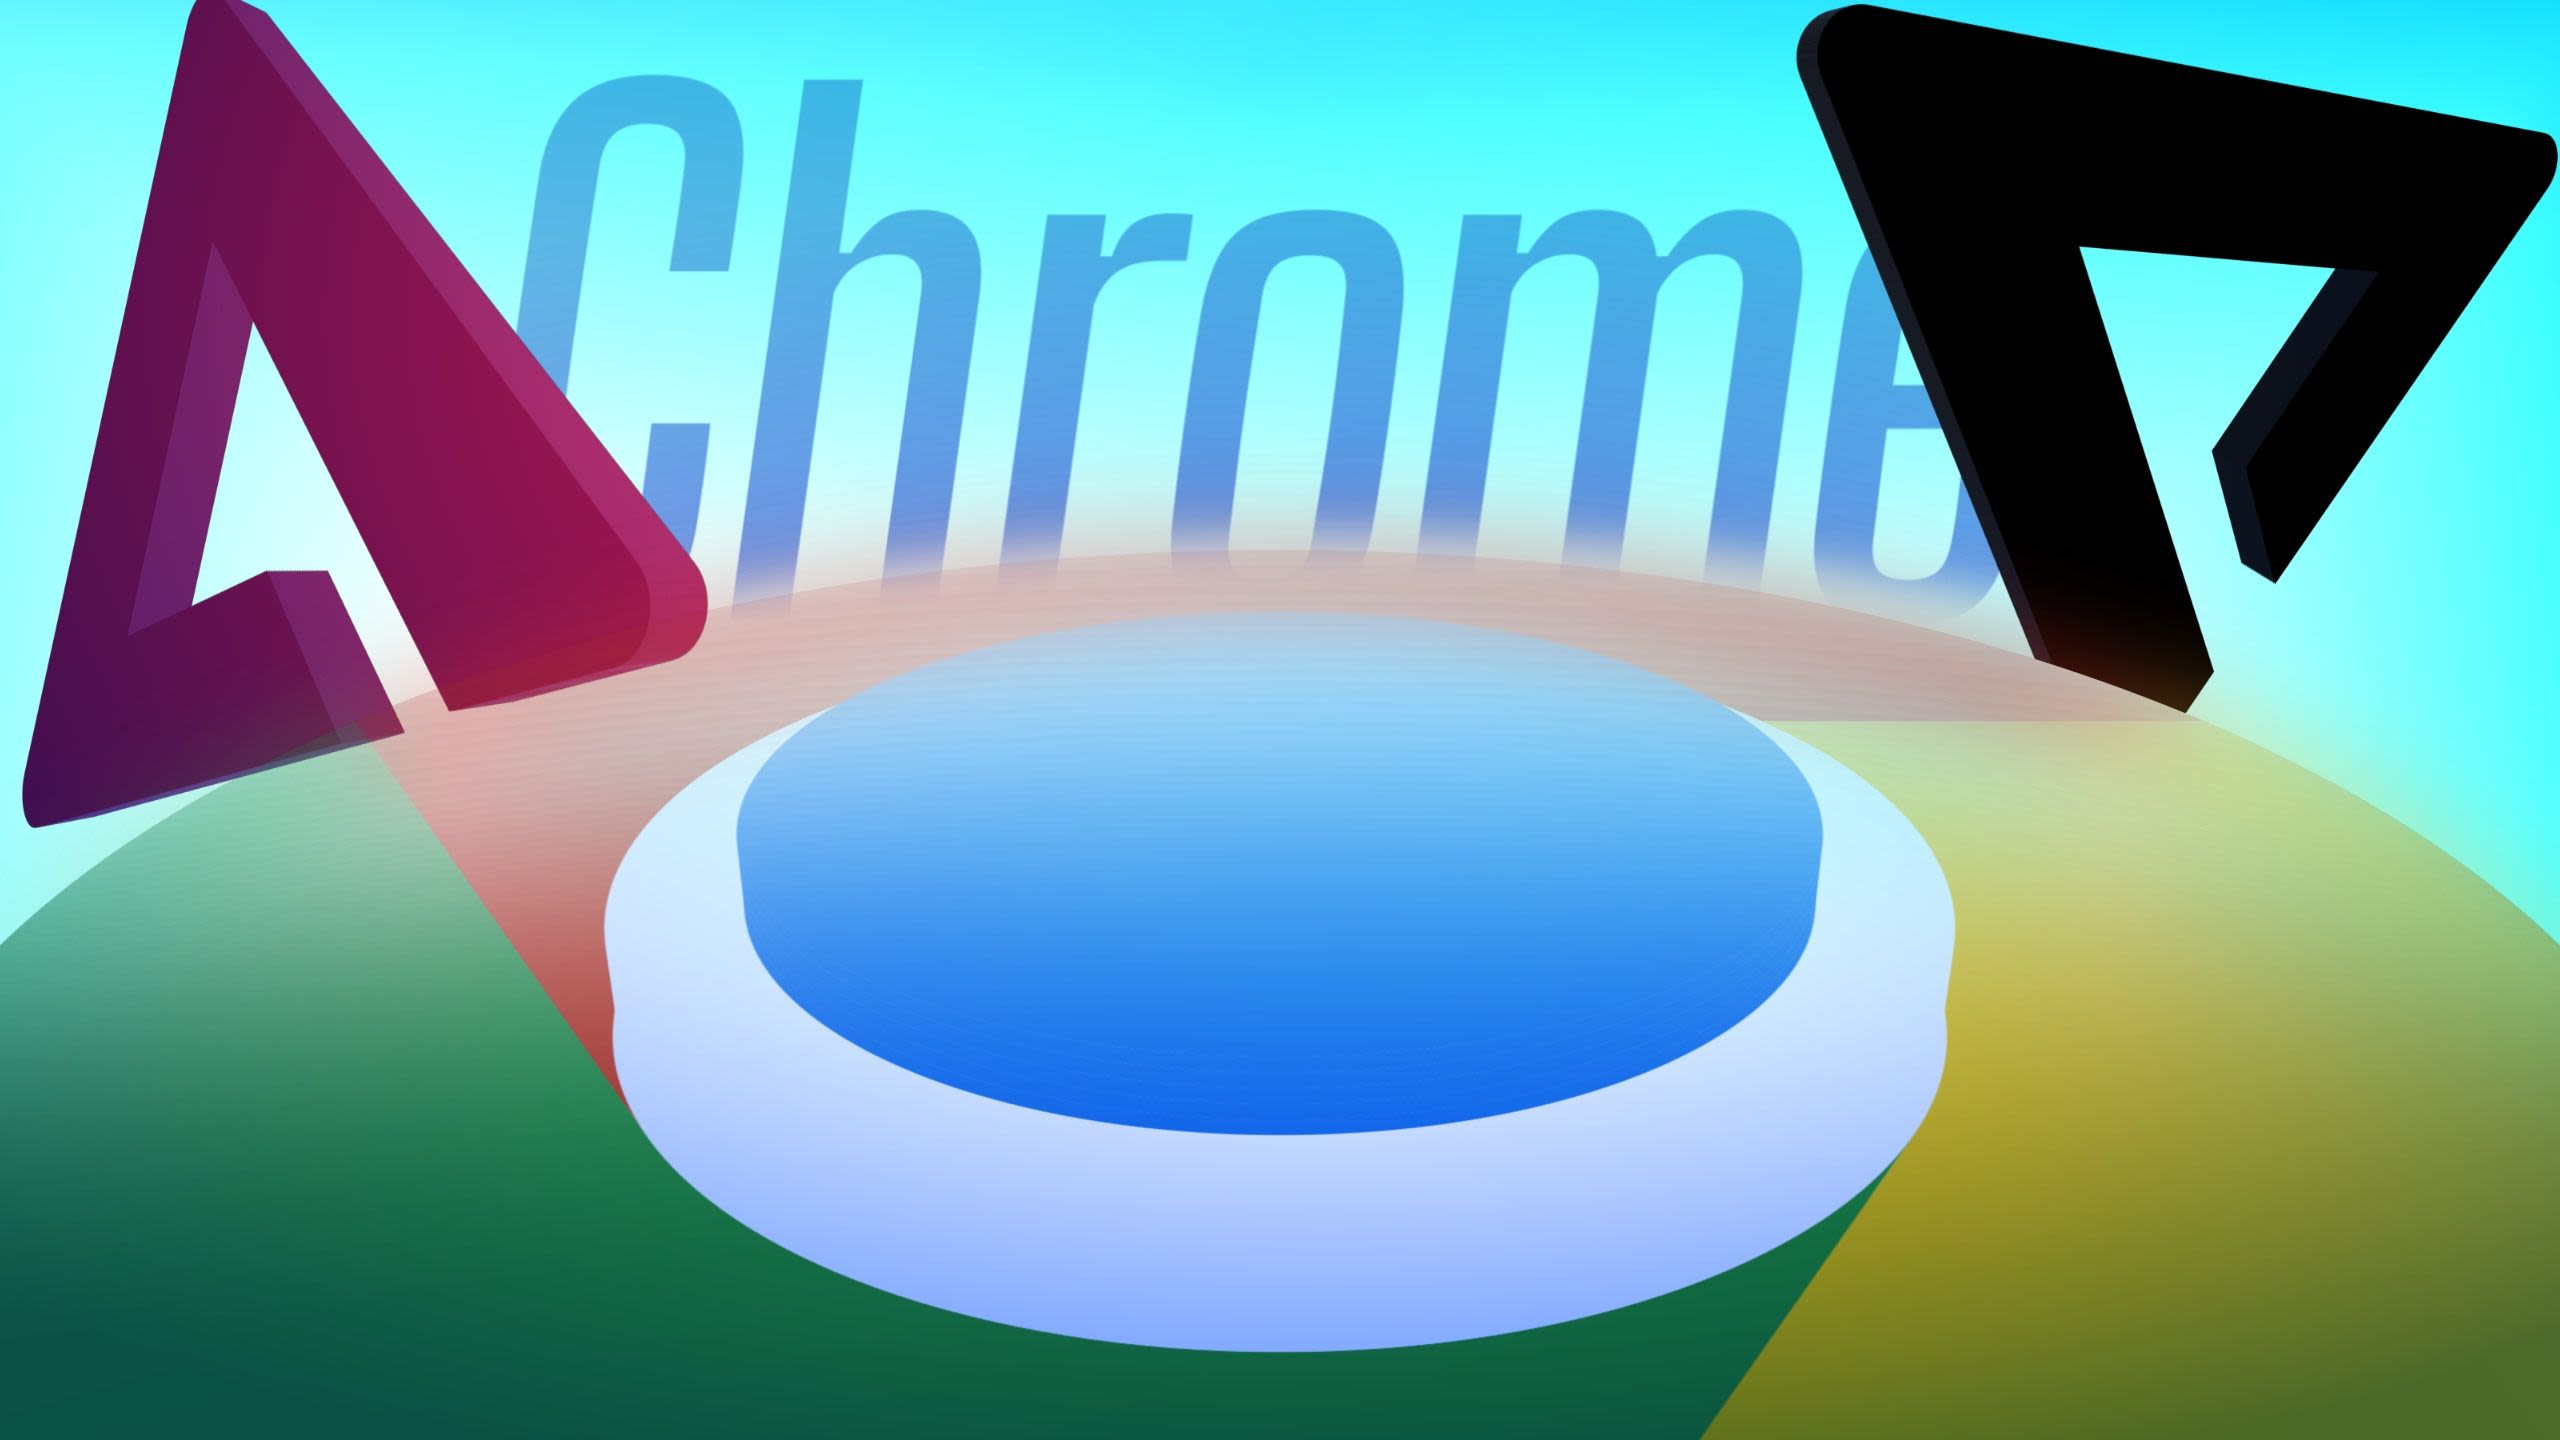 Google Chrome could soon stop warning that a 'File might be harmful' for most APKs